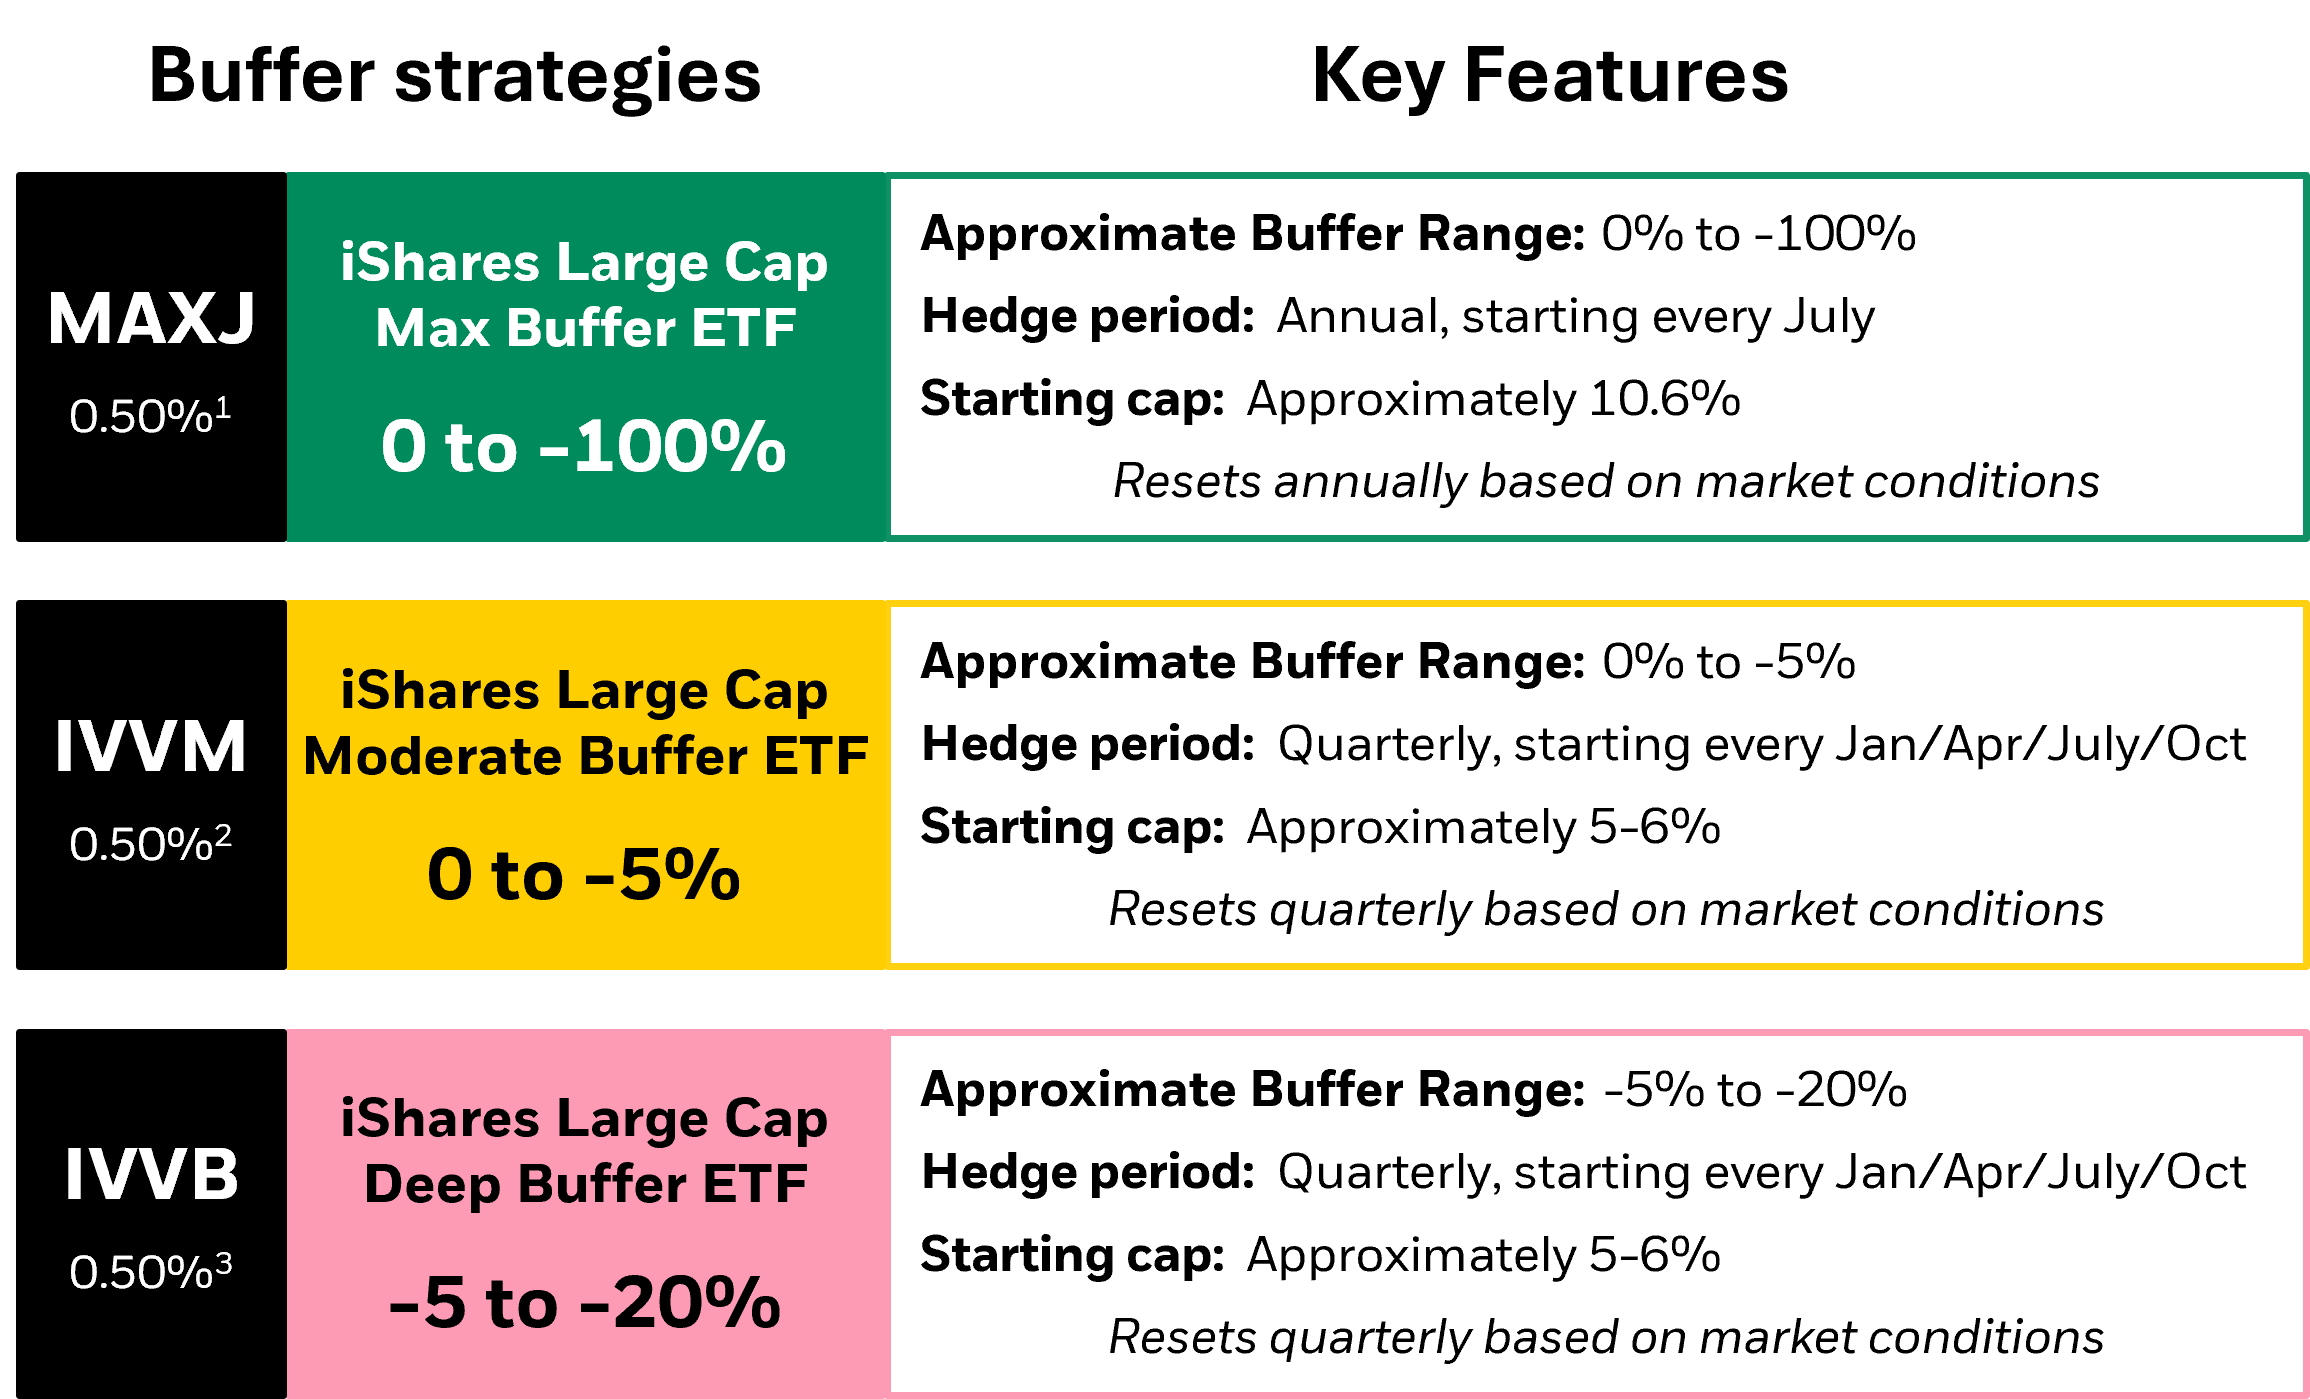 This graphic presents the three iShares Buffer ETF offerings: MAXJ, IVVM, and IVVB. It details their key features, including the buffer range, hedge period, and starting cap, to inform potential investment strategies.